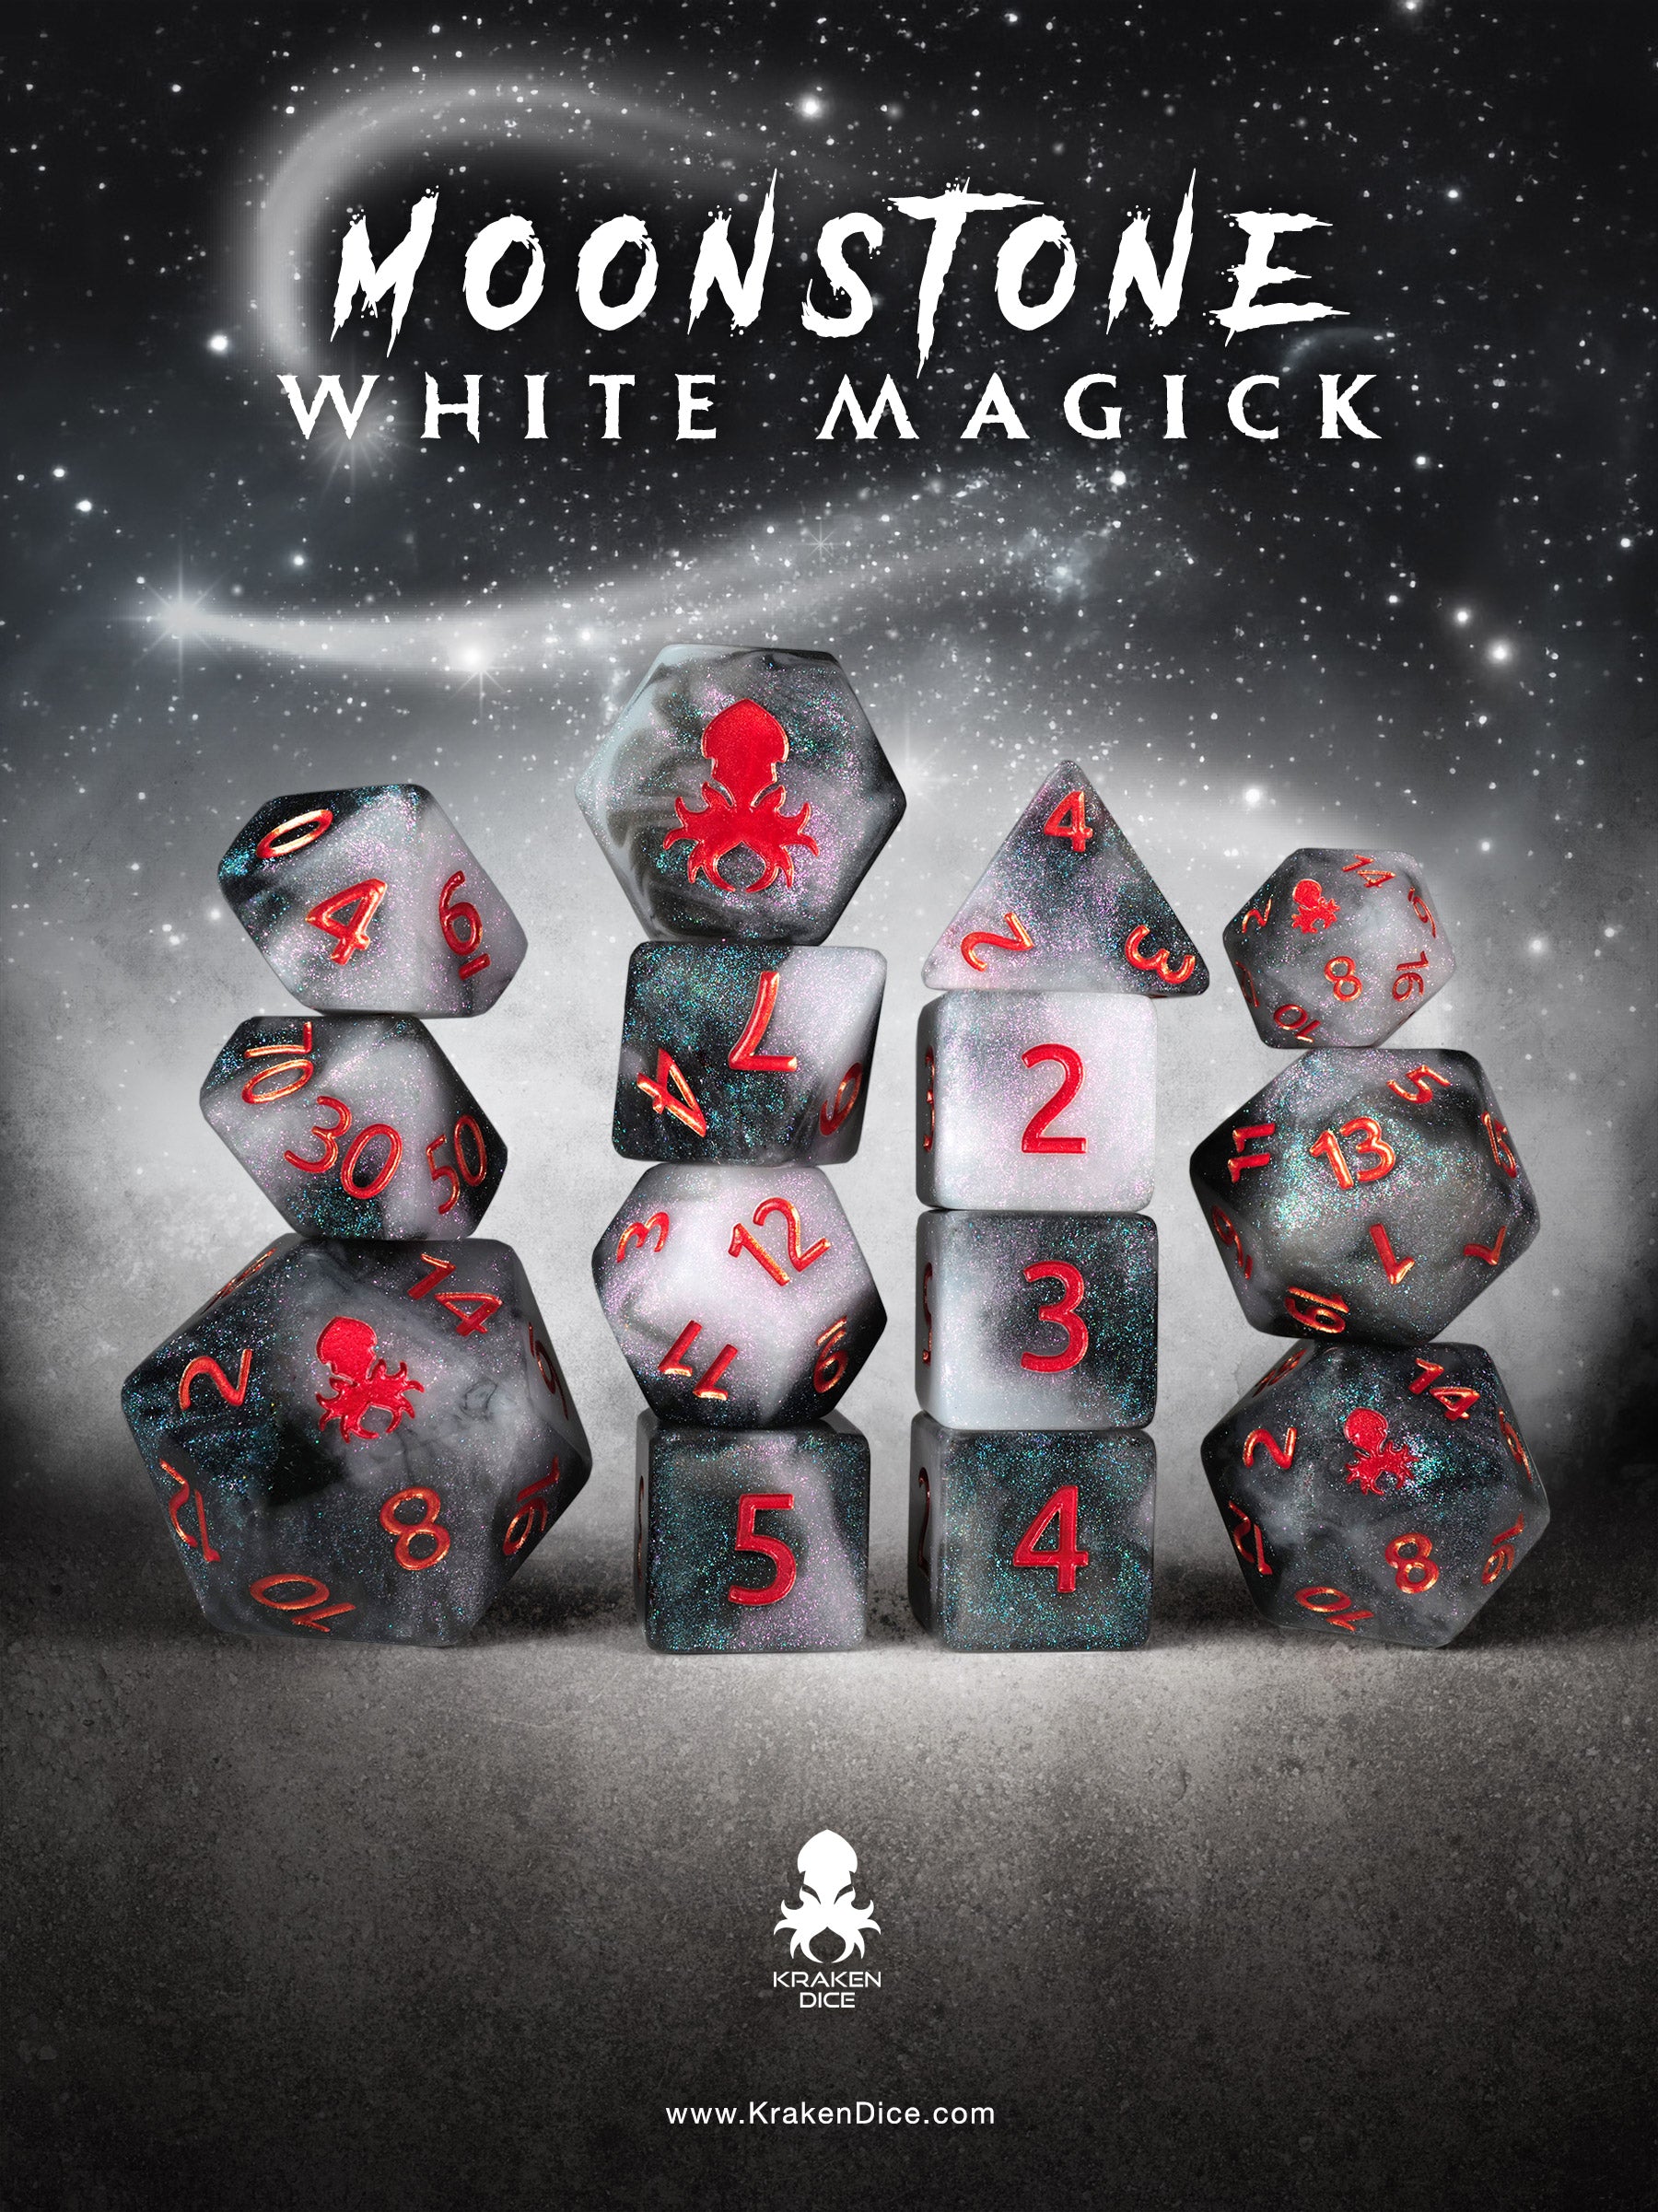 Moonstone White Magick 14pc Dice Set inked in Red